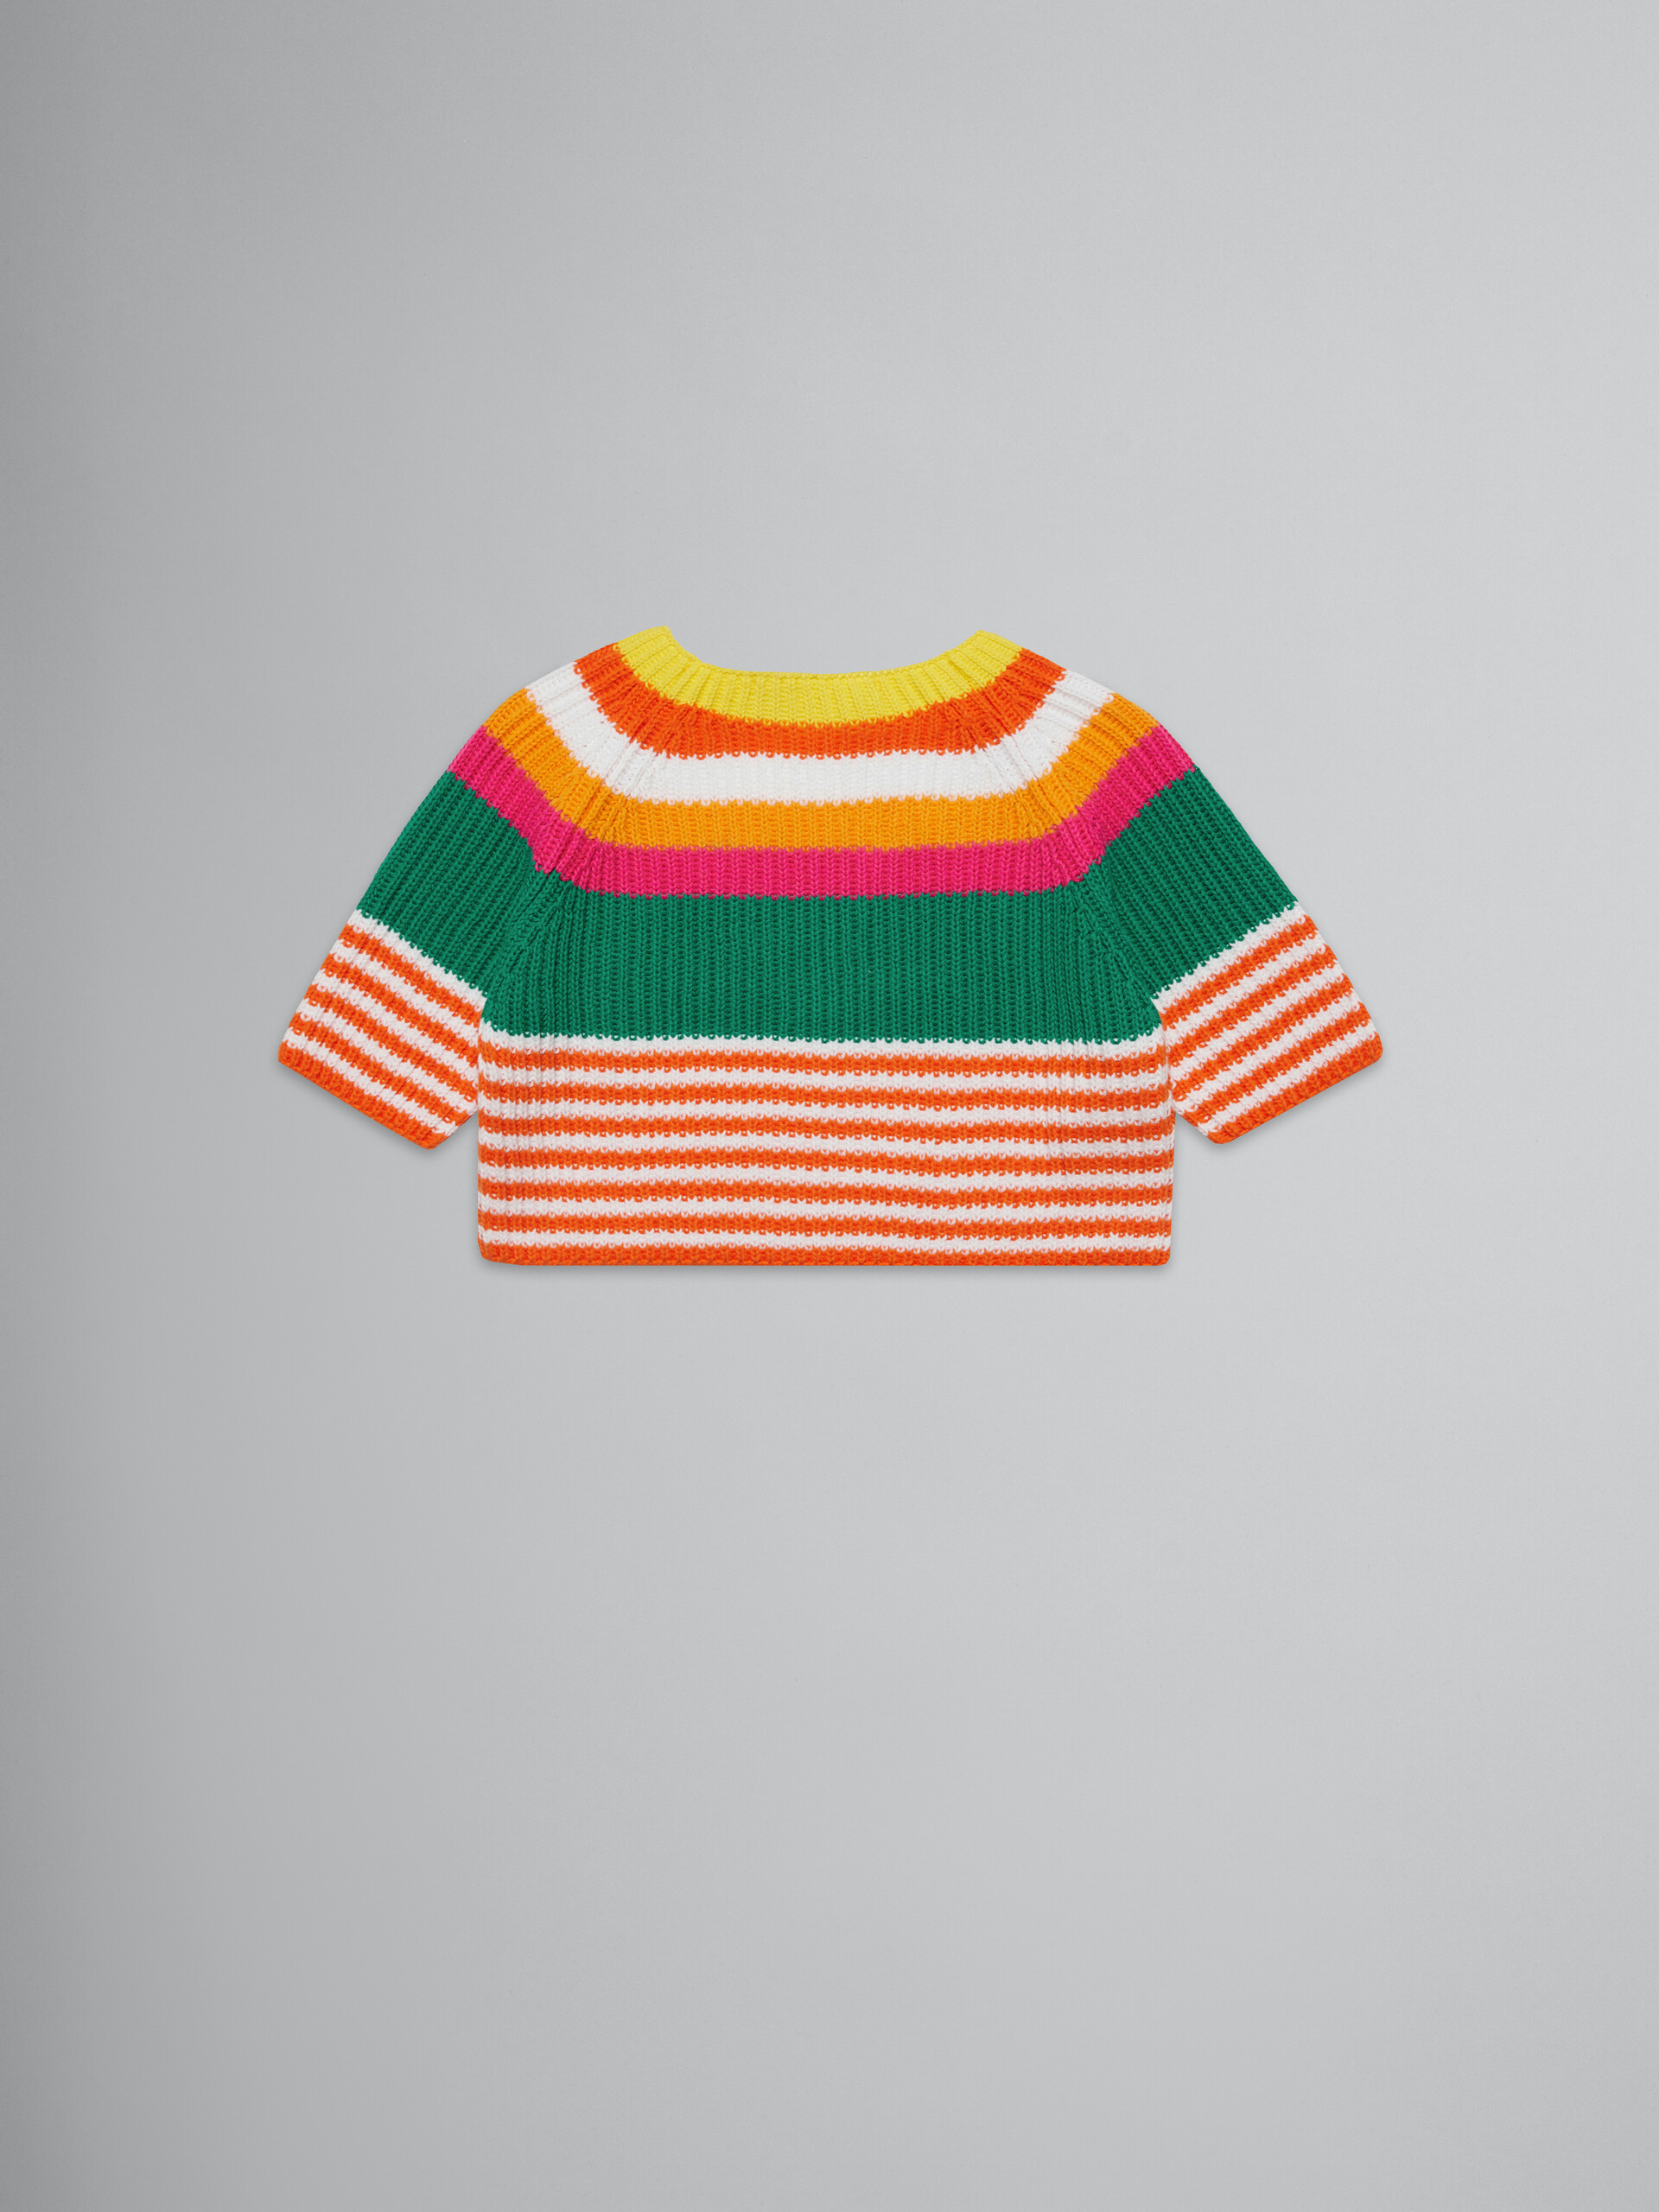 Multicolor striped knit pullover - Knitwear - Image 2